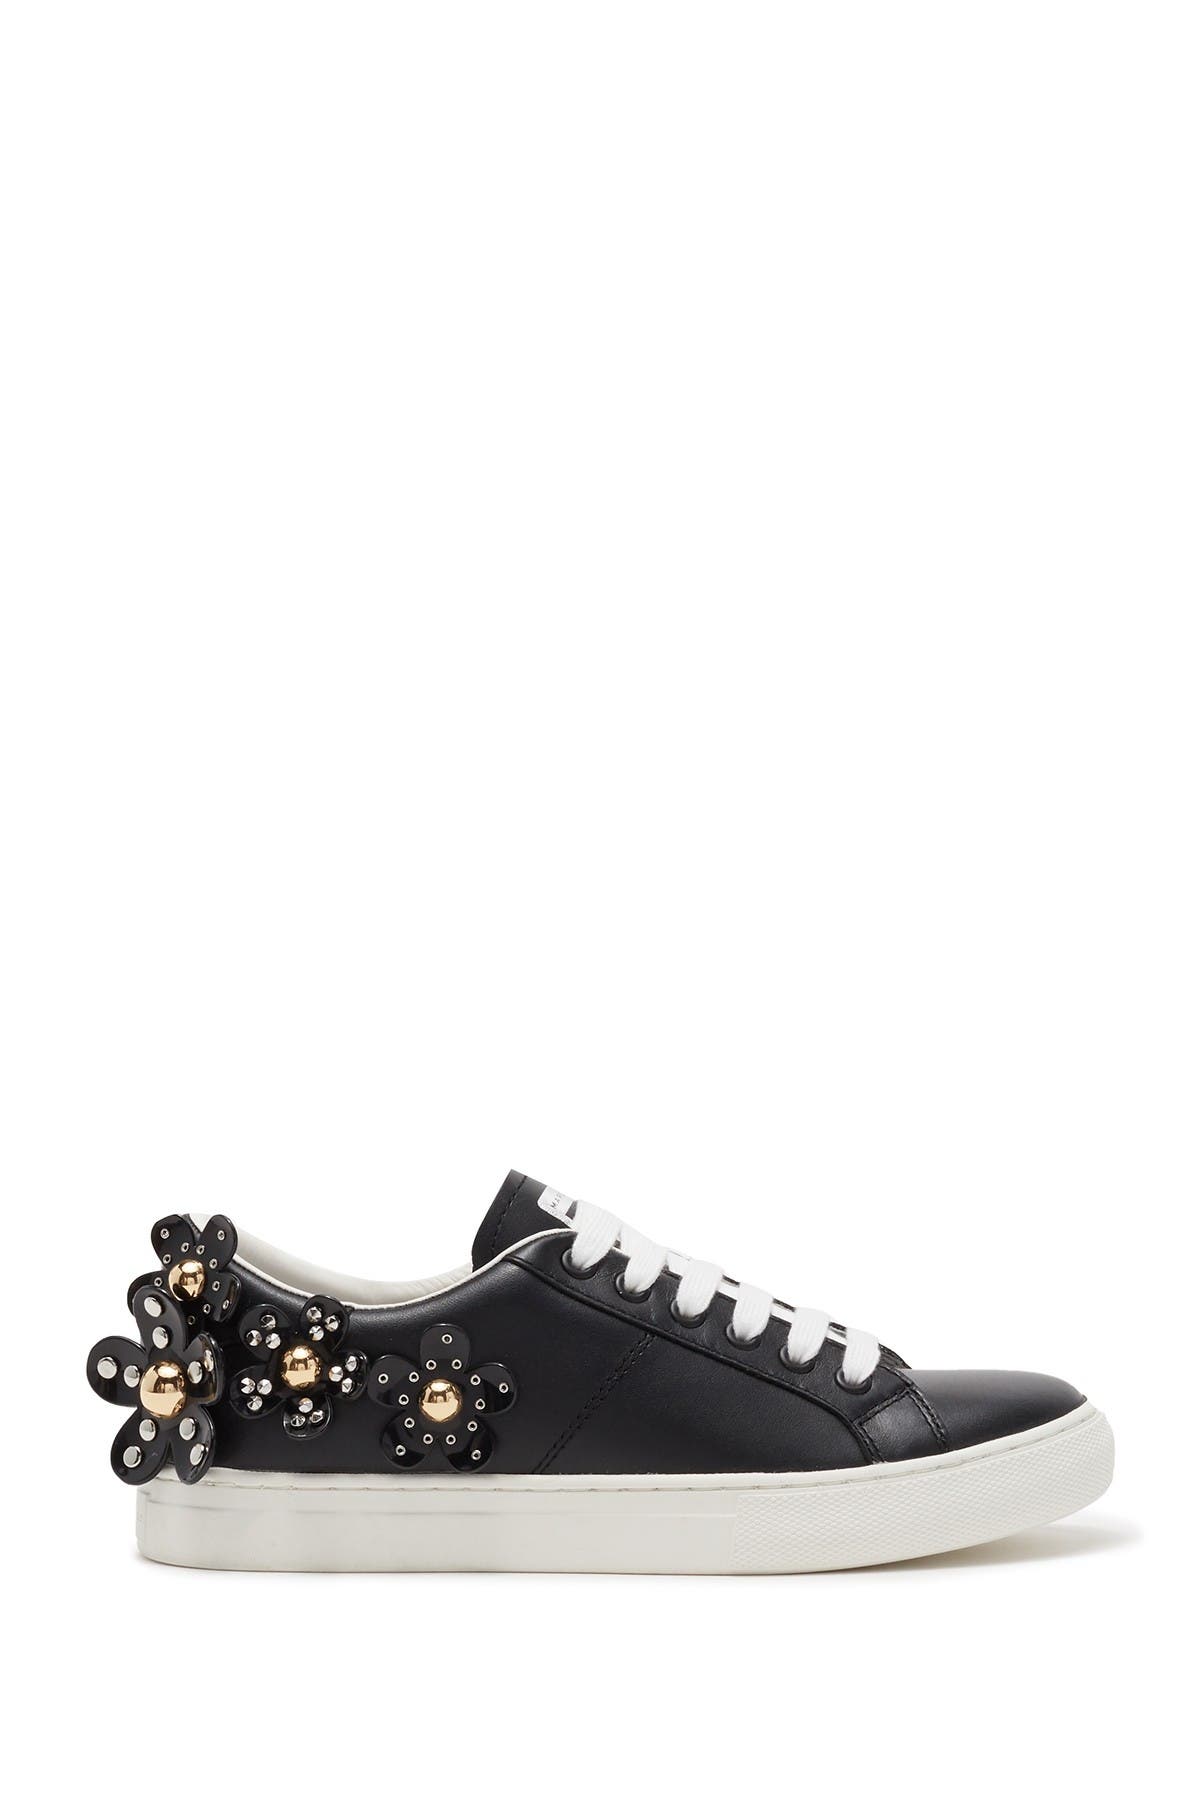 marc jacobs sneakers daisy